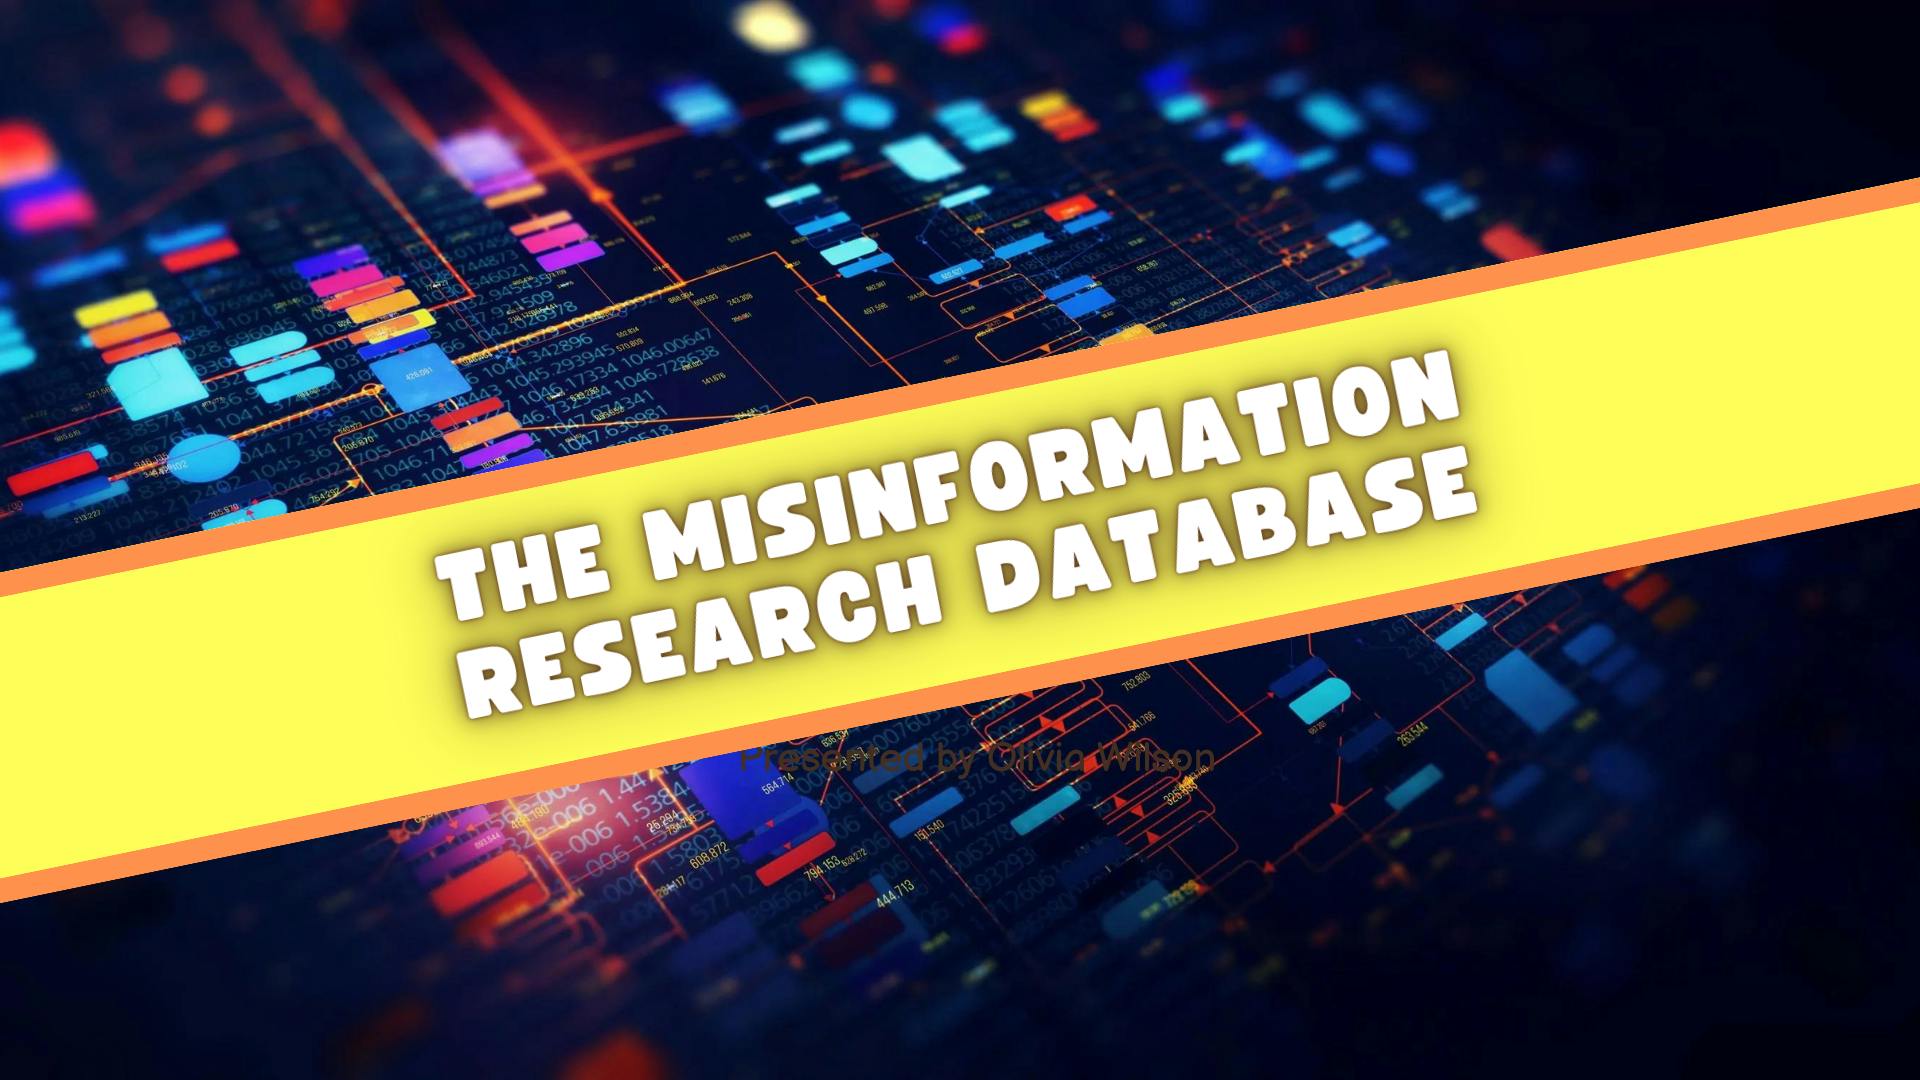 The Misinformation research.png